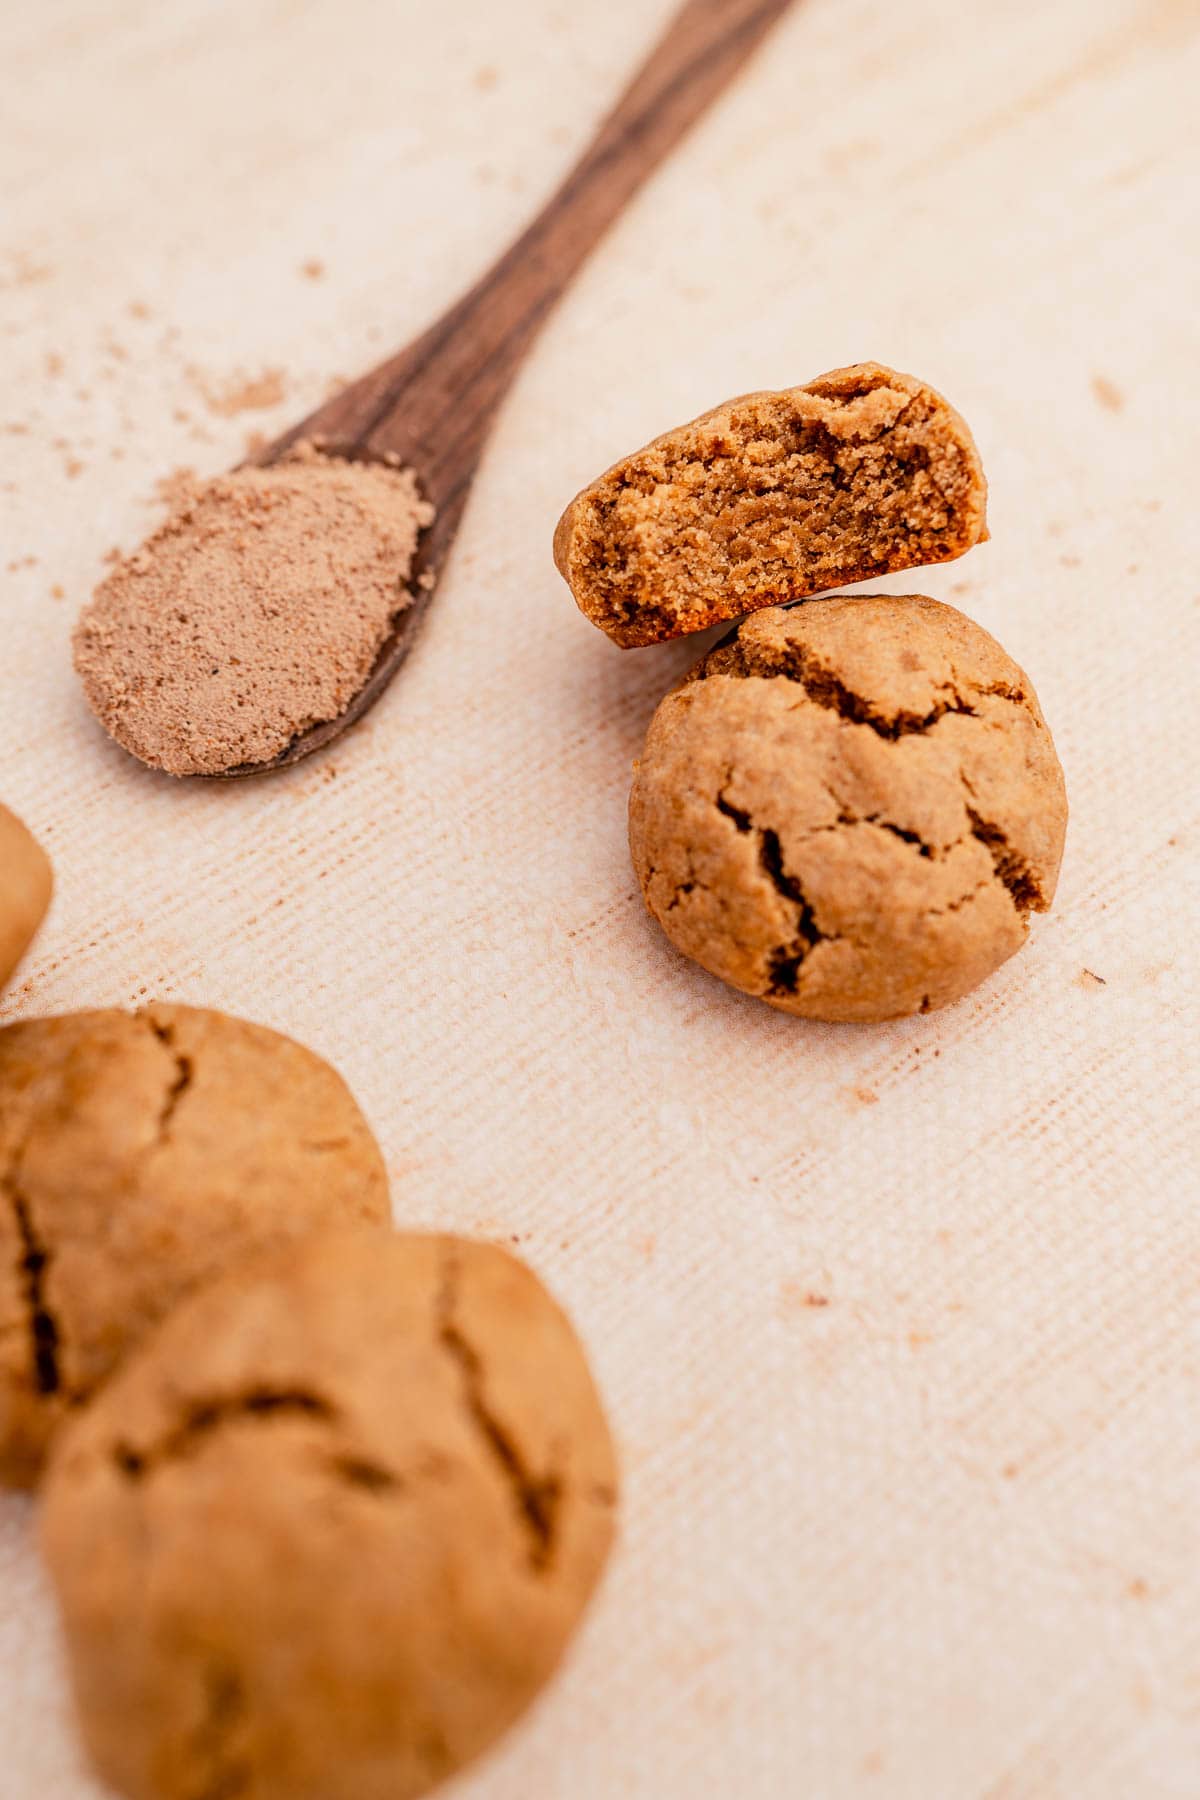 A wooden spoon next to some ginger chai cookies.